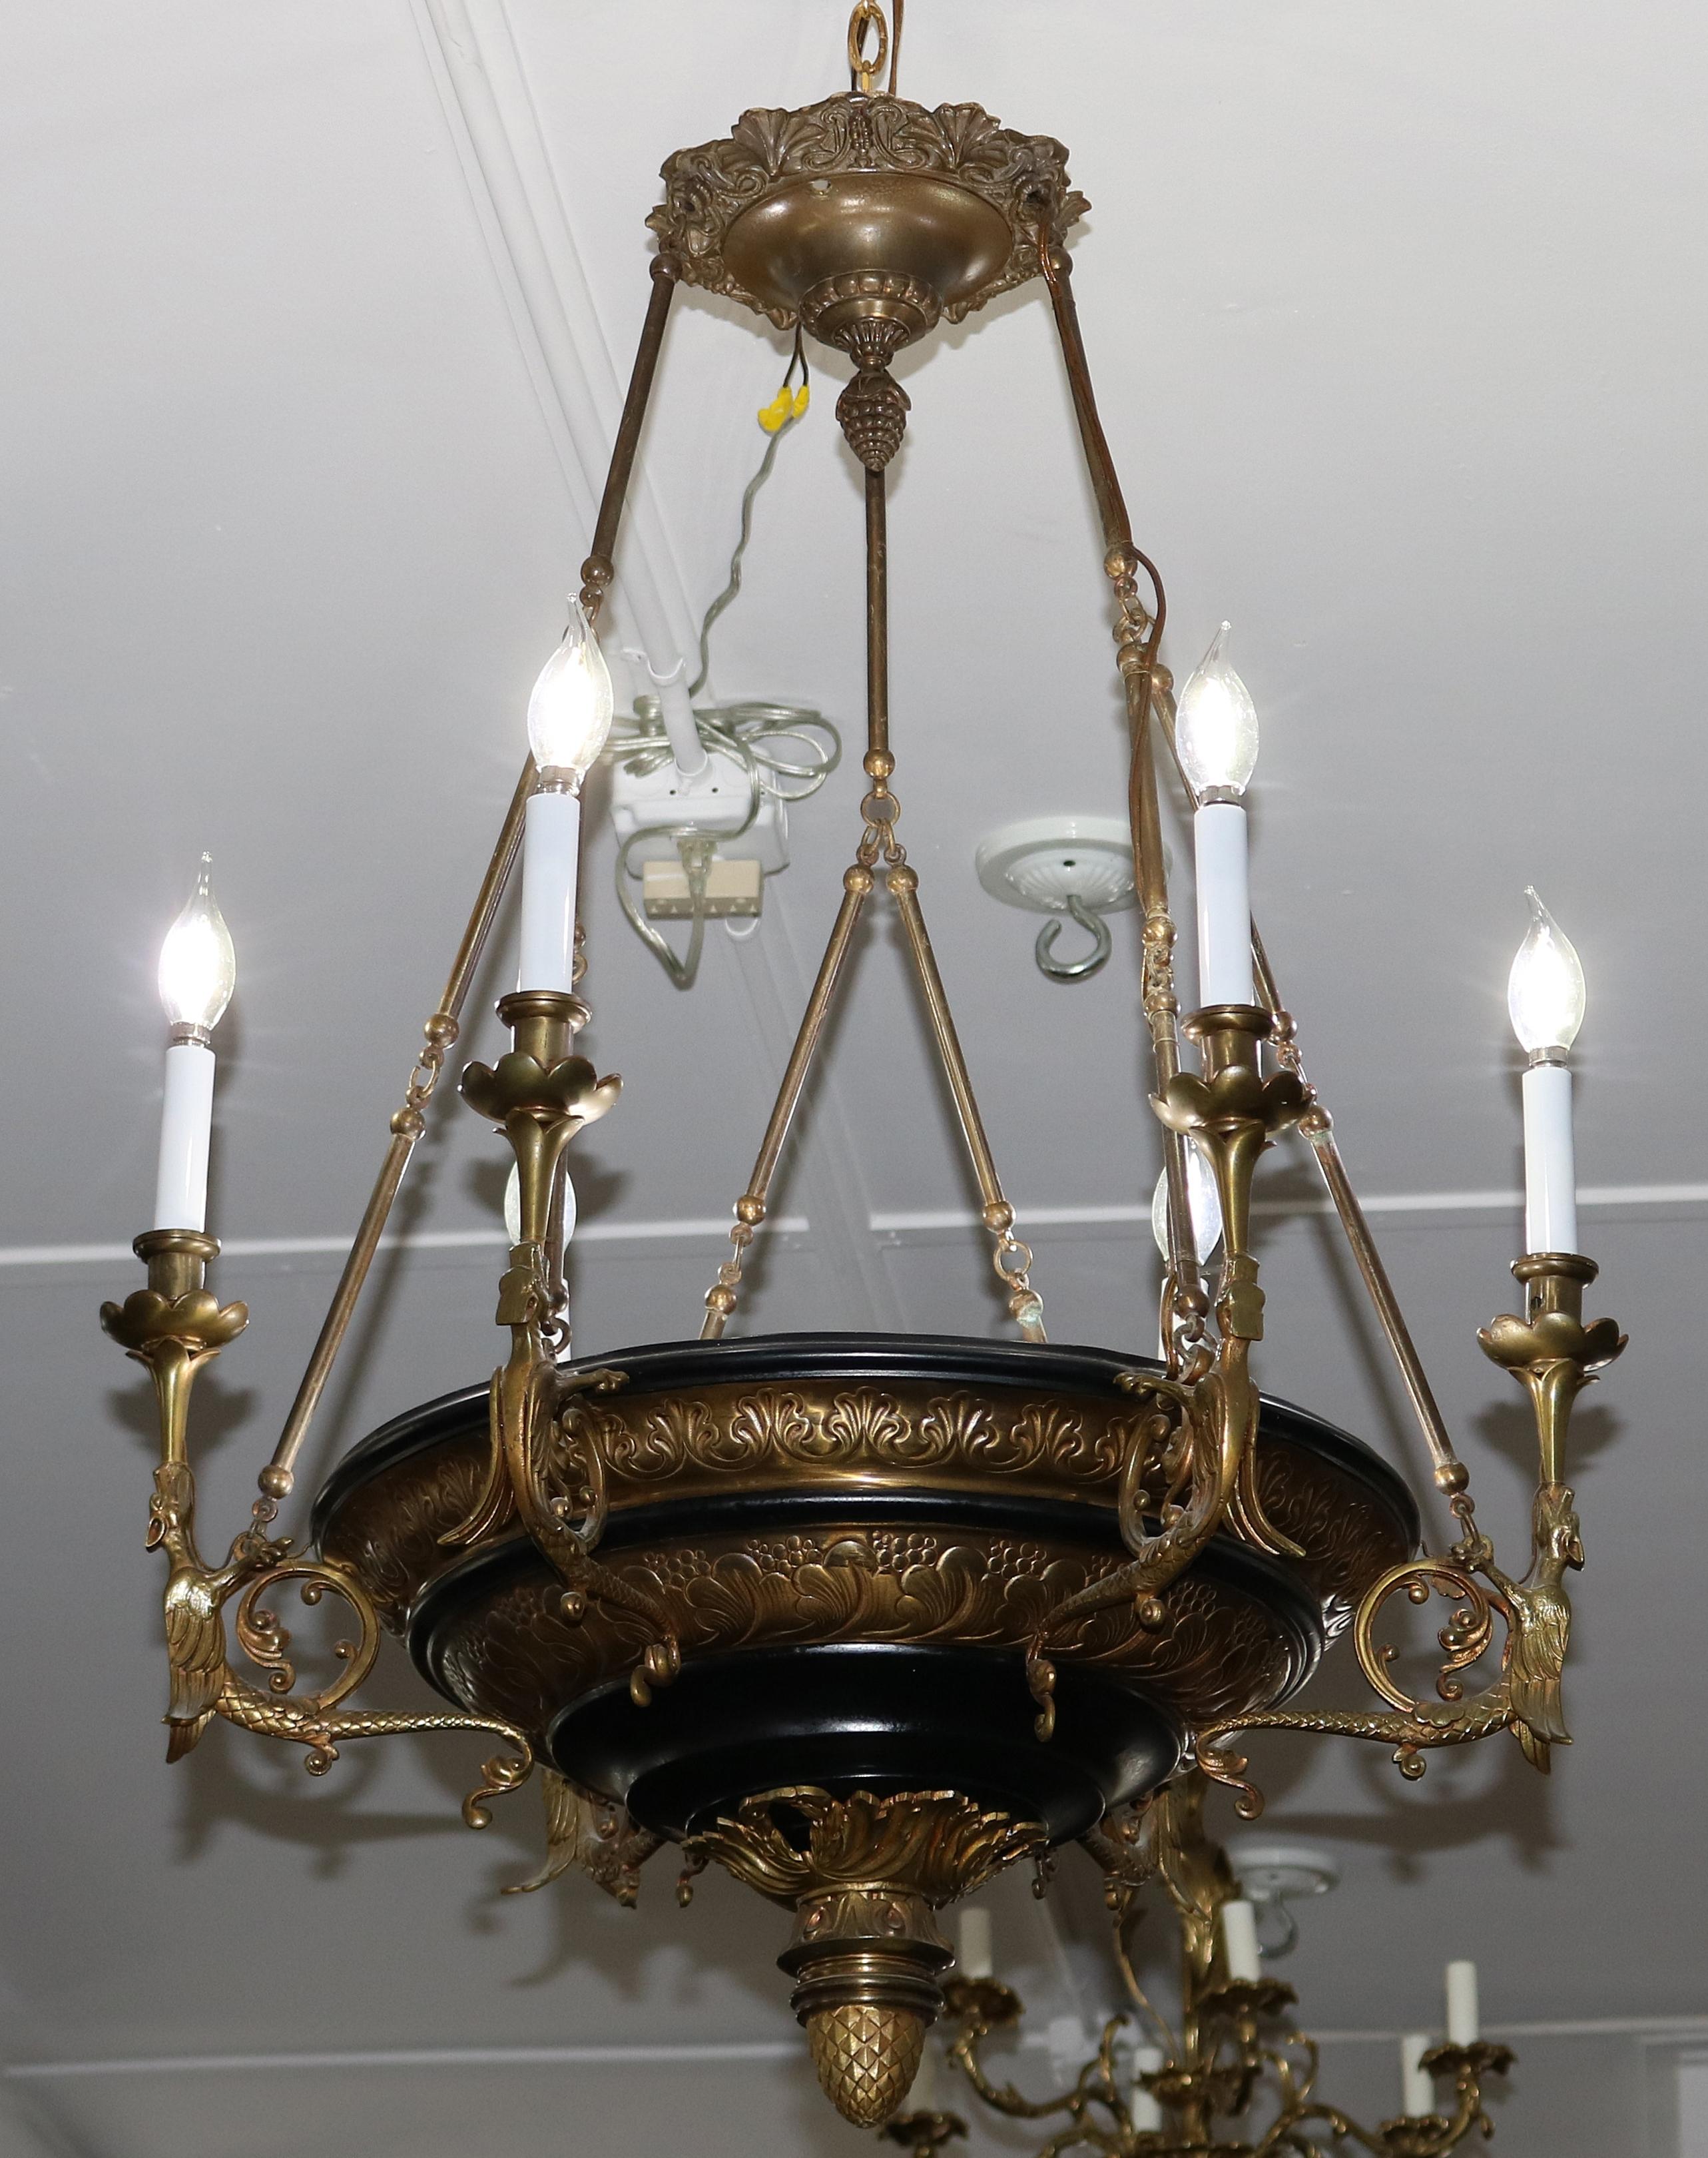 ​Antique French Empire Style Figural Carved Dragons 9 Light Chandelier 
Measures 
37 In H x 27.25 In w x 27.24 D